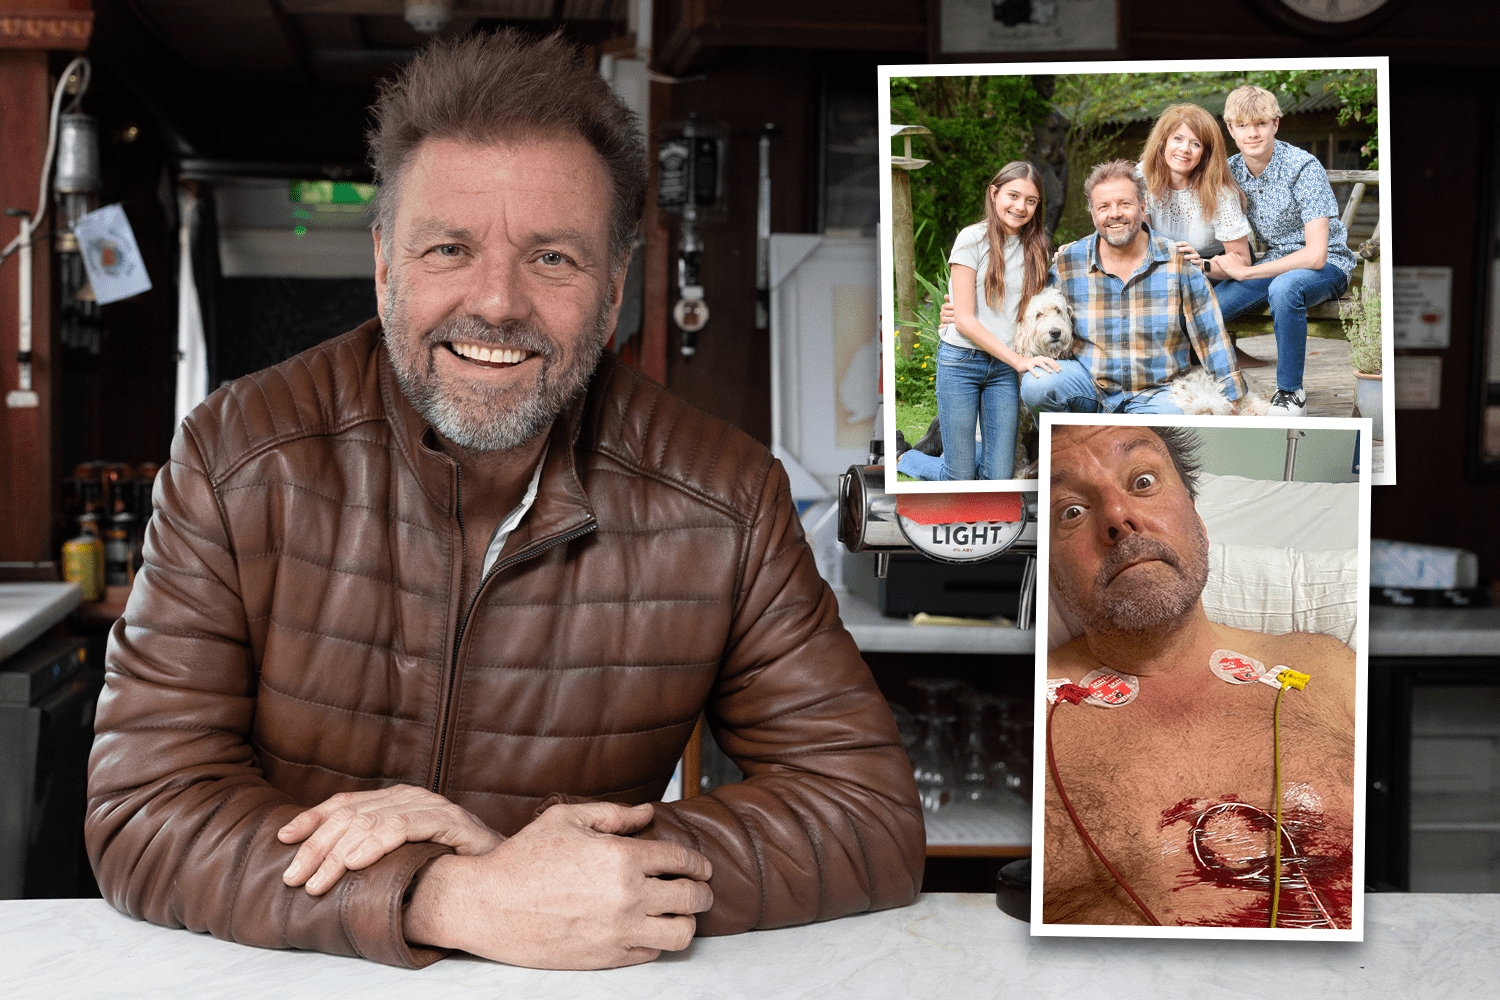 After heart failure I bought a pub without telling wife, says Martin Roberts